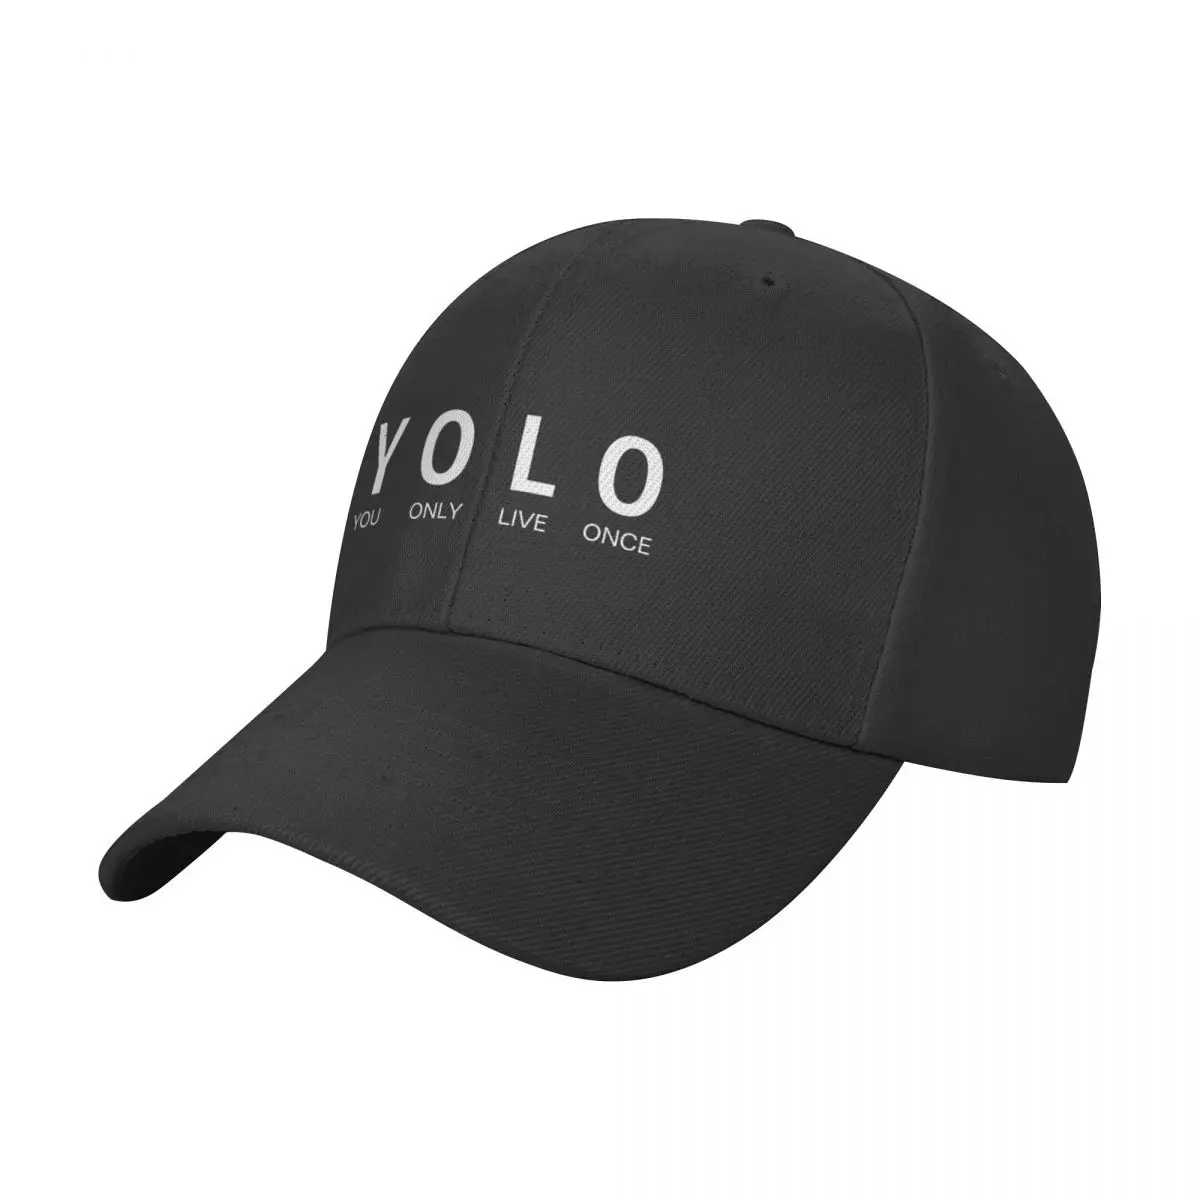 

YOLO (You Only Live Once) - White Simple Baseball Cap Military Tactical Cap New In Hat Rave Golf Wear Sun Hats For Women Men's